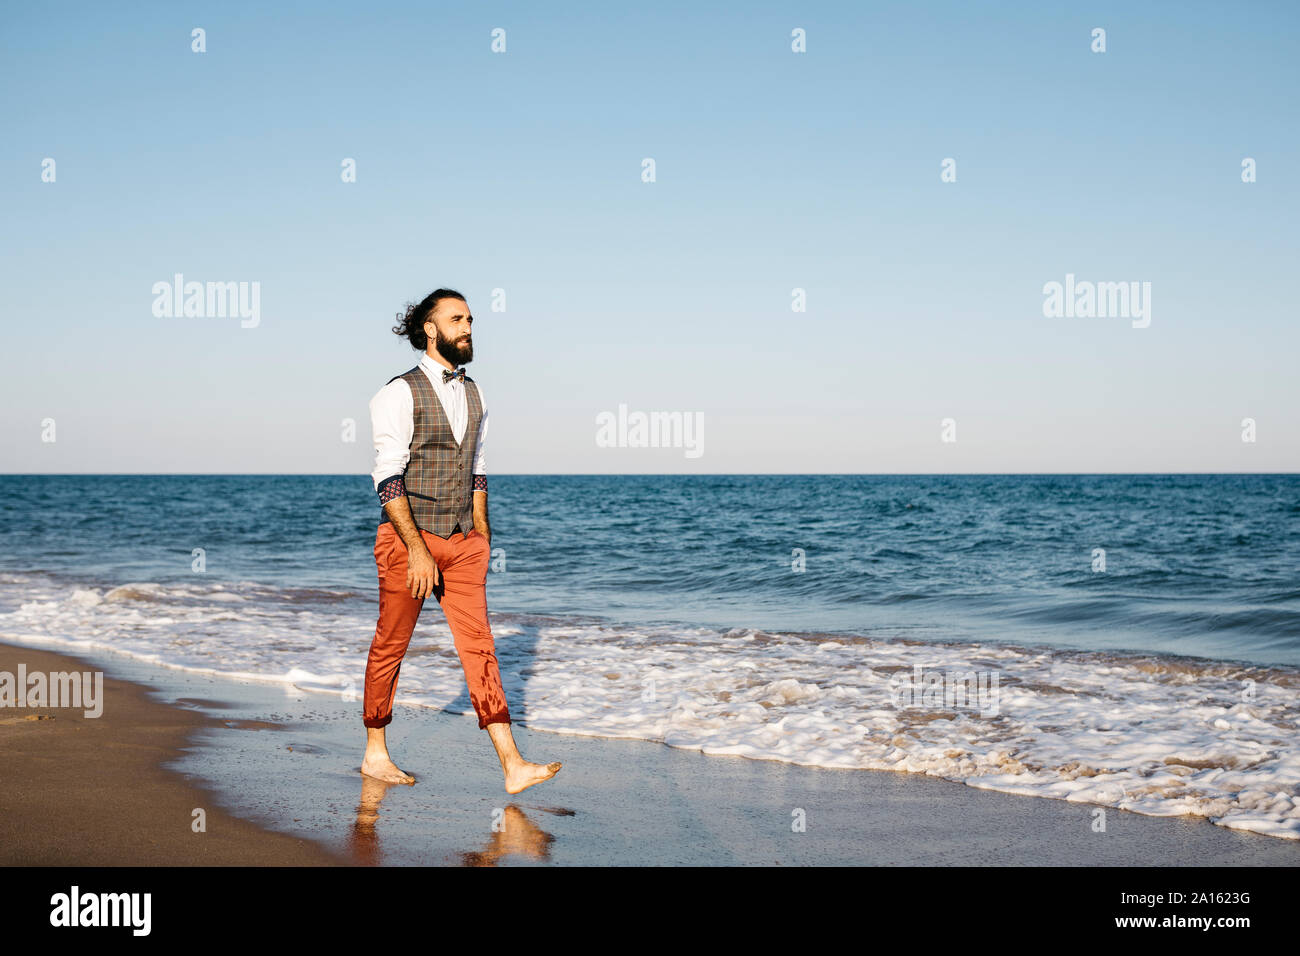 Well dressed man walking on a beach at water's edge Stock Photo